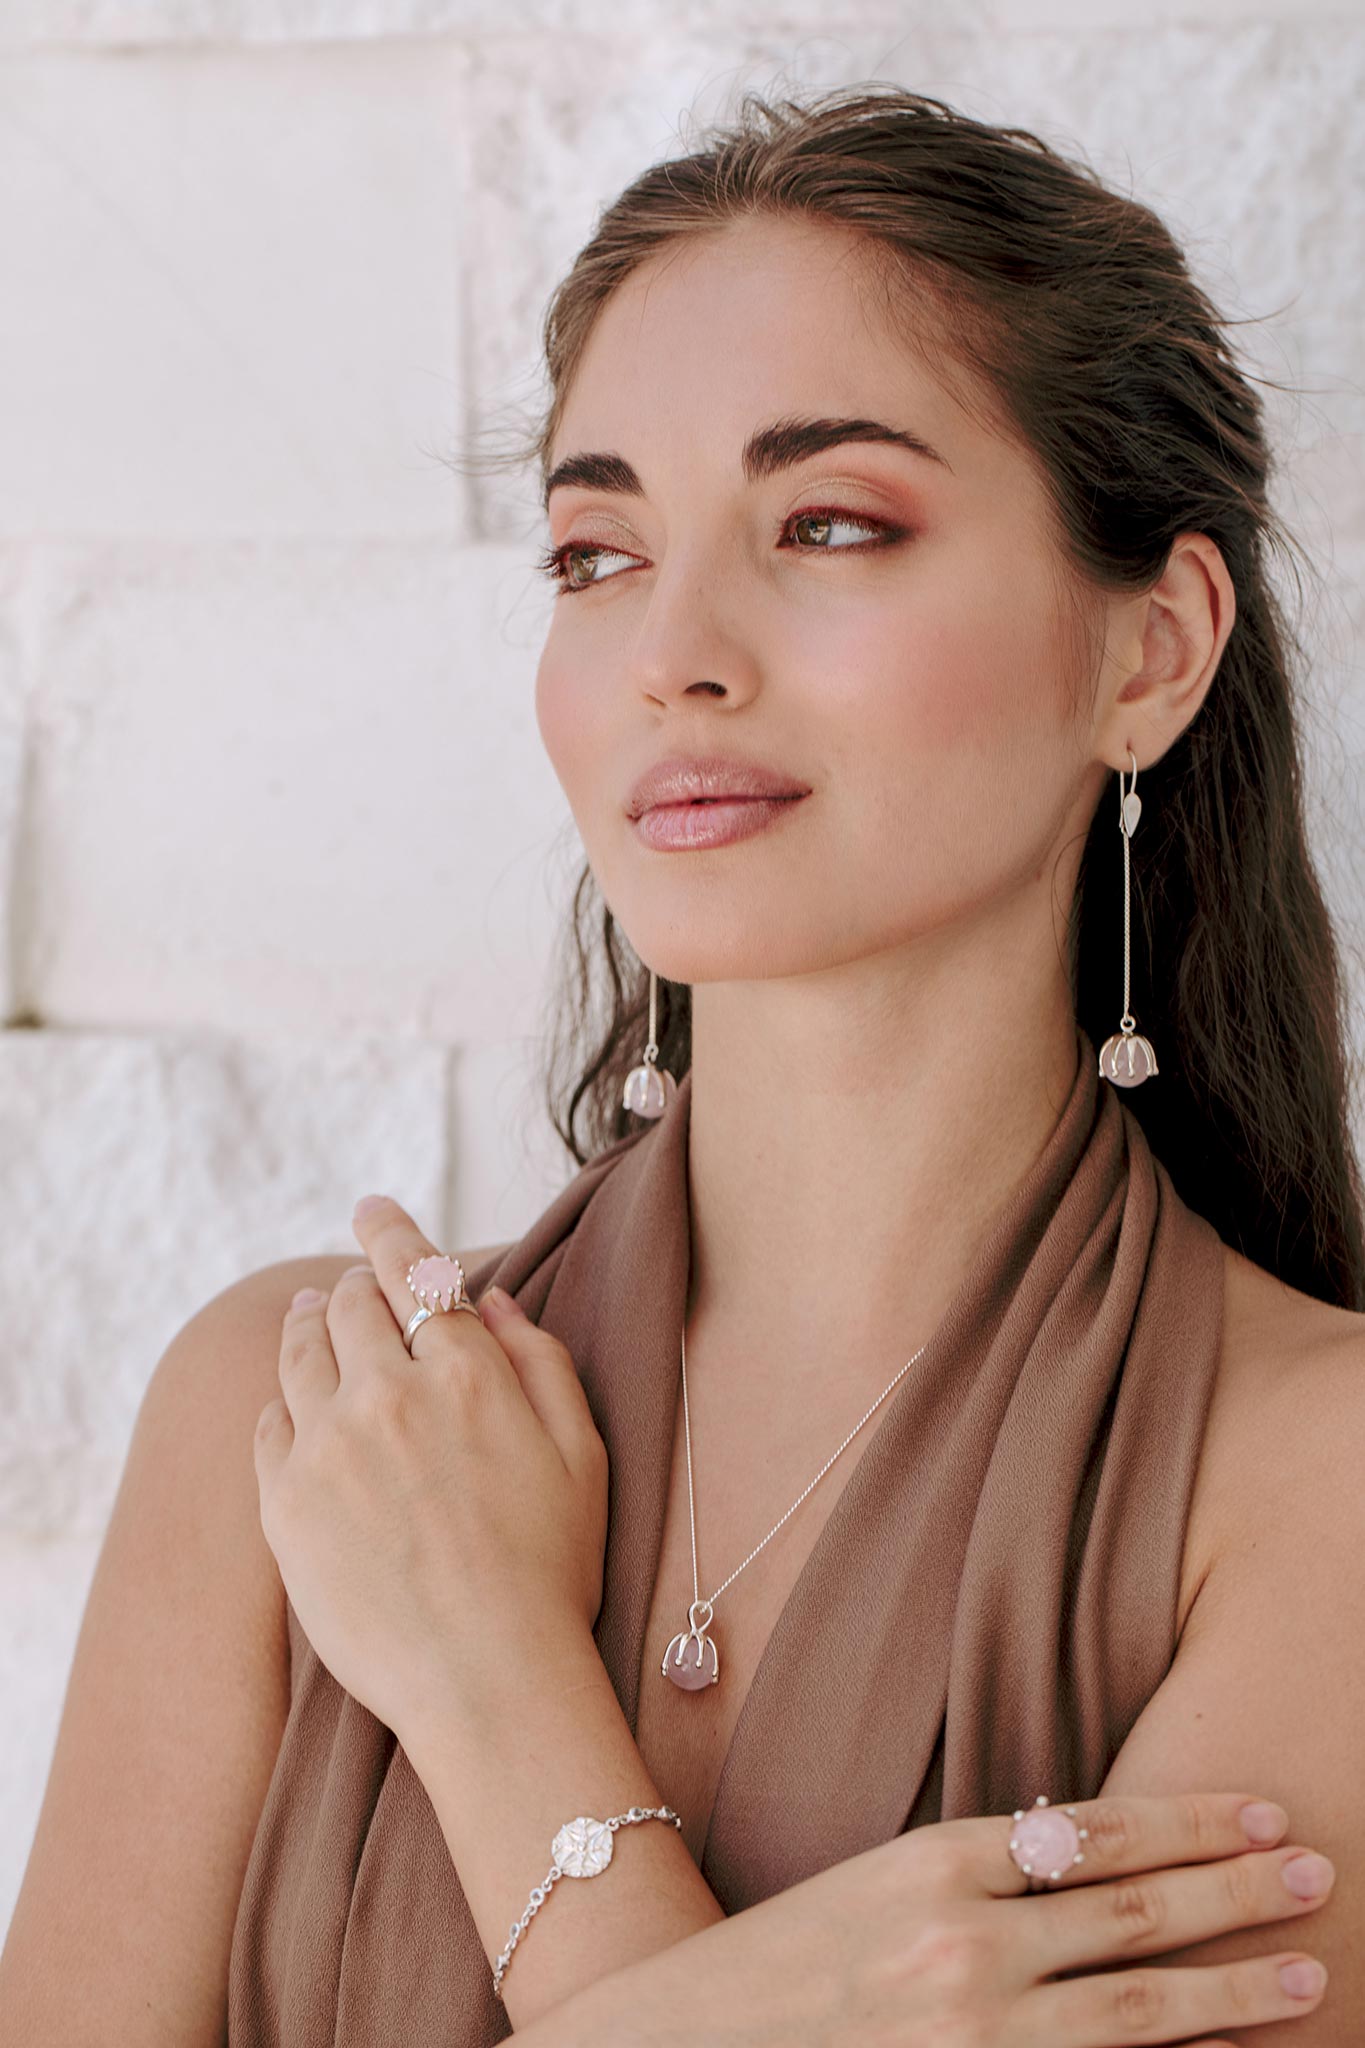 Our bestselling Kaora Sandara jewerly, crafted with sterling silver 925. 